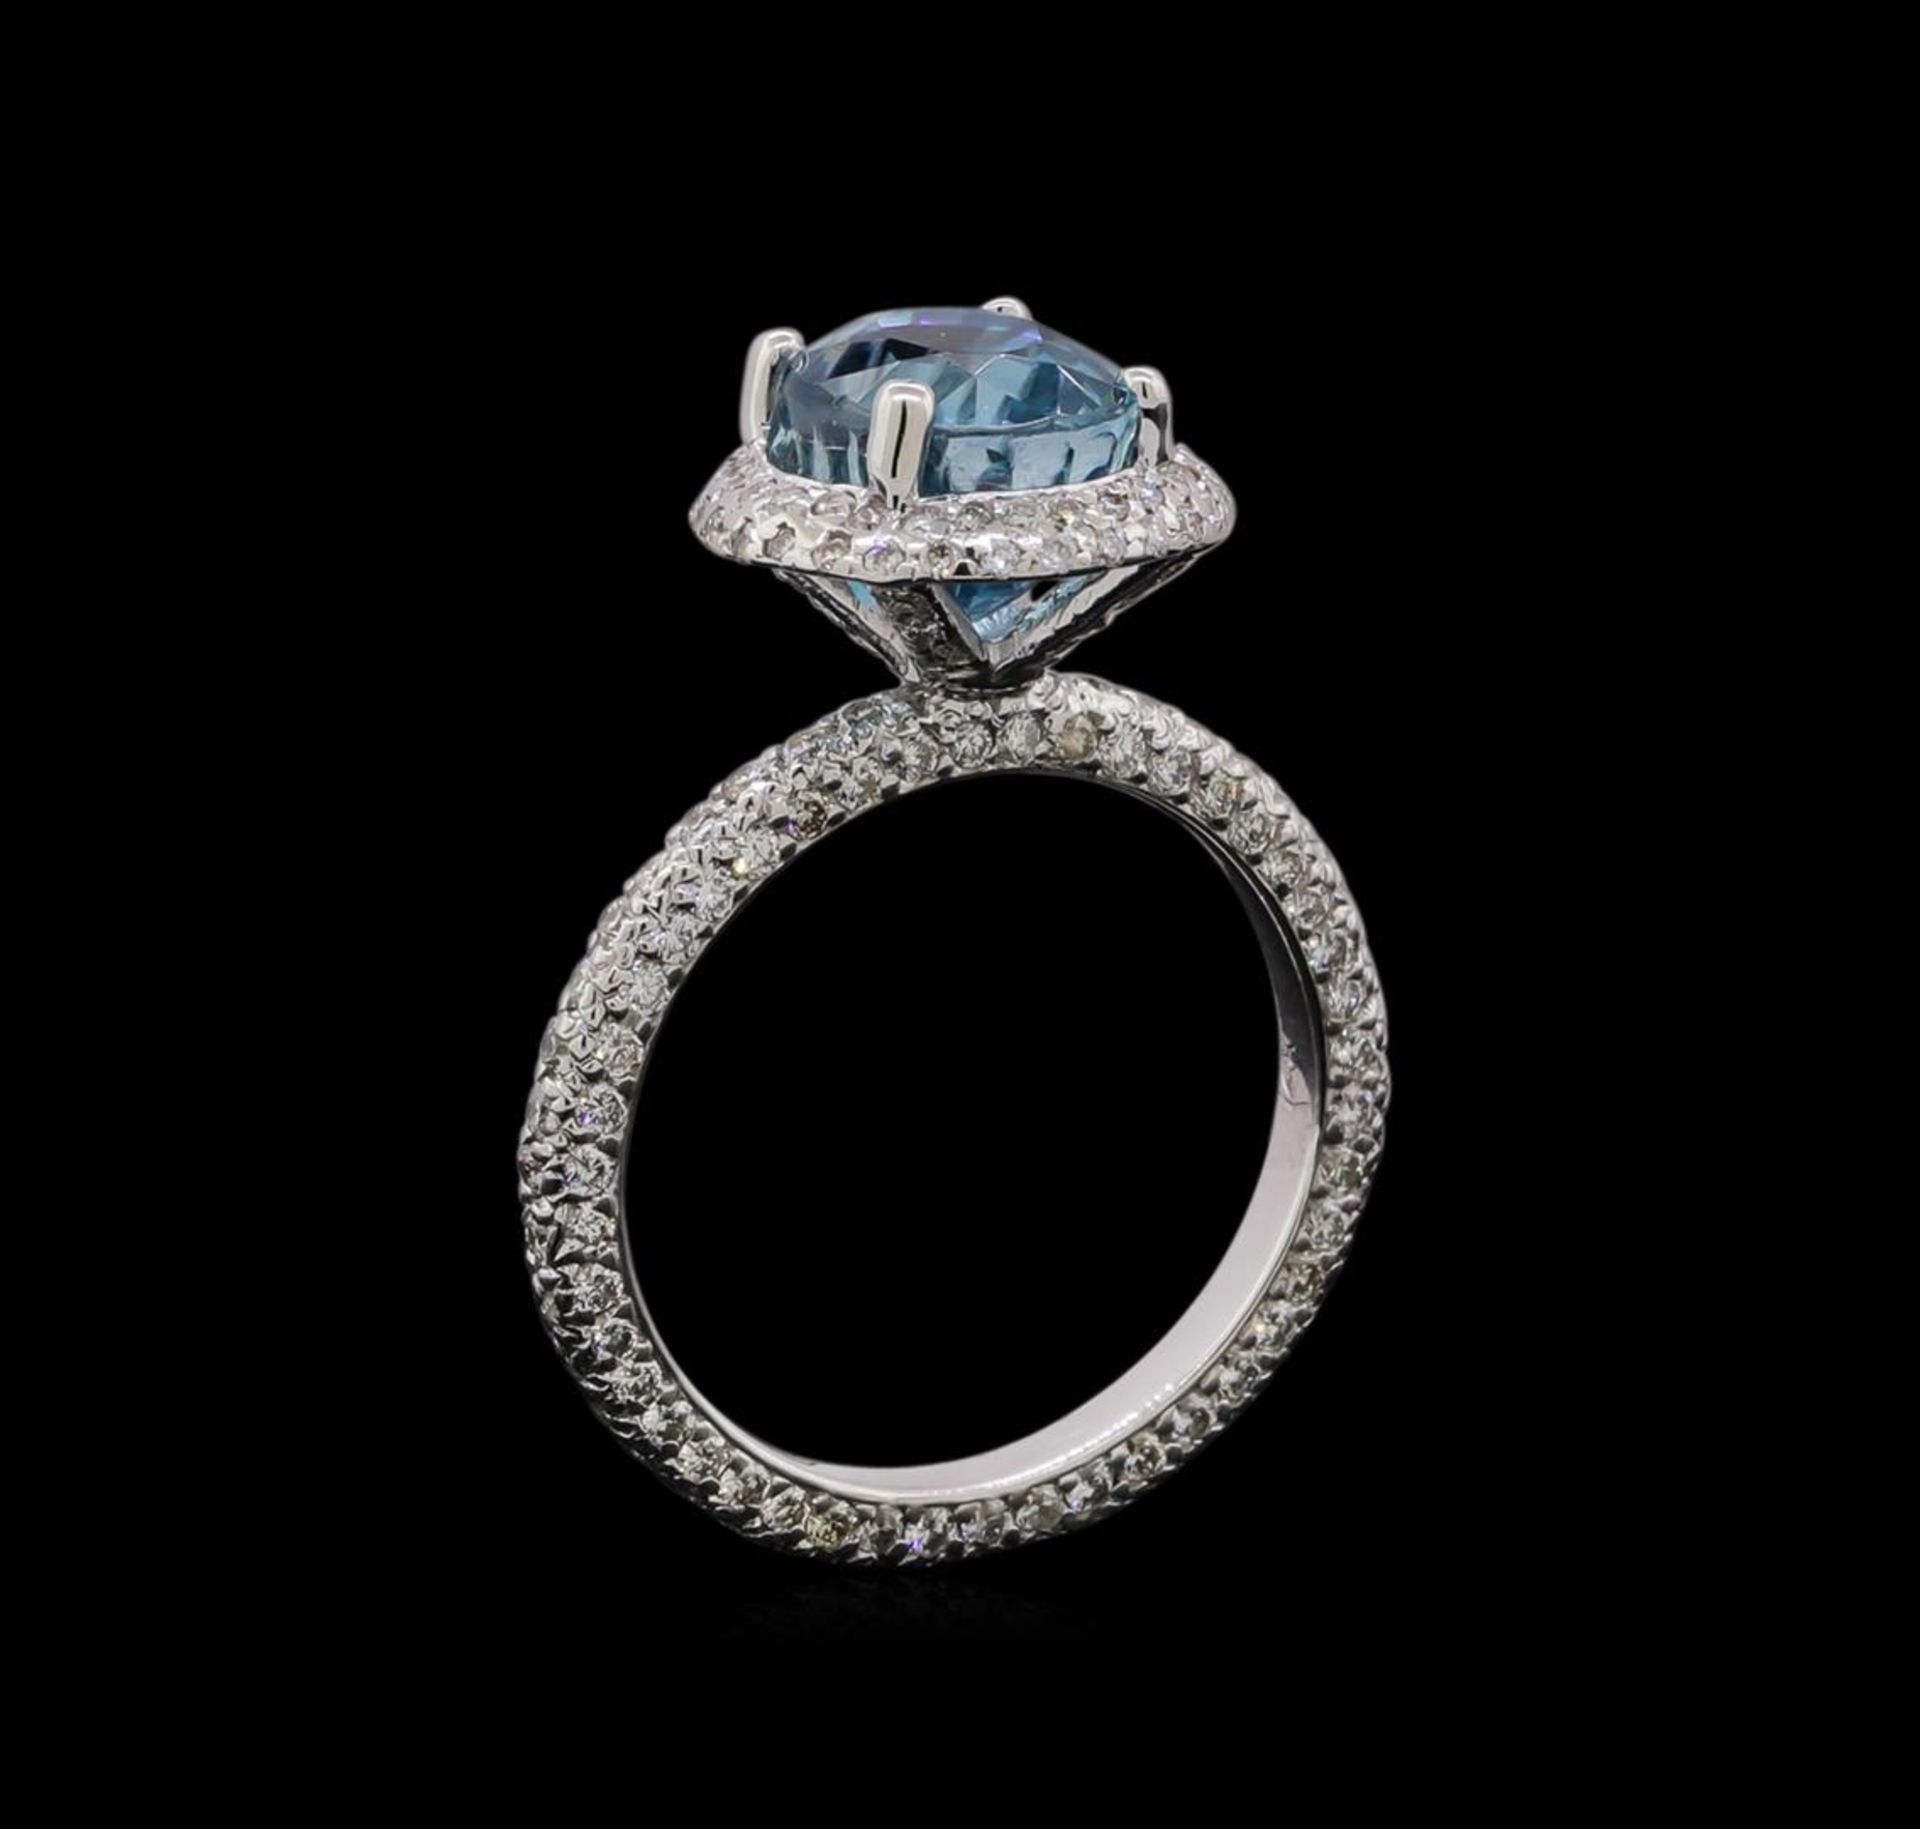 4.23 ctw Blue Zircon and Diamond Ring - 14KT White Gold - Image 4 of 5